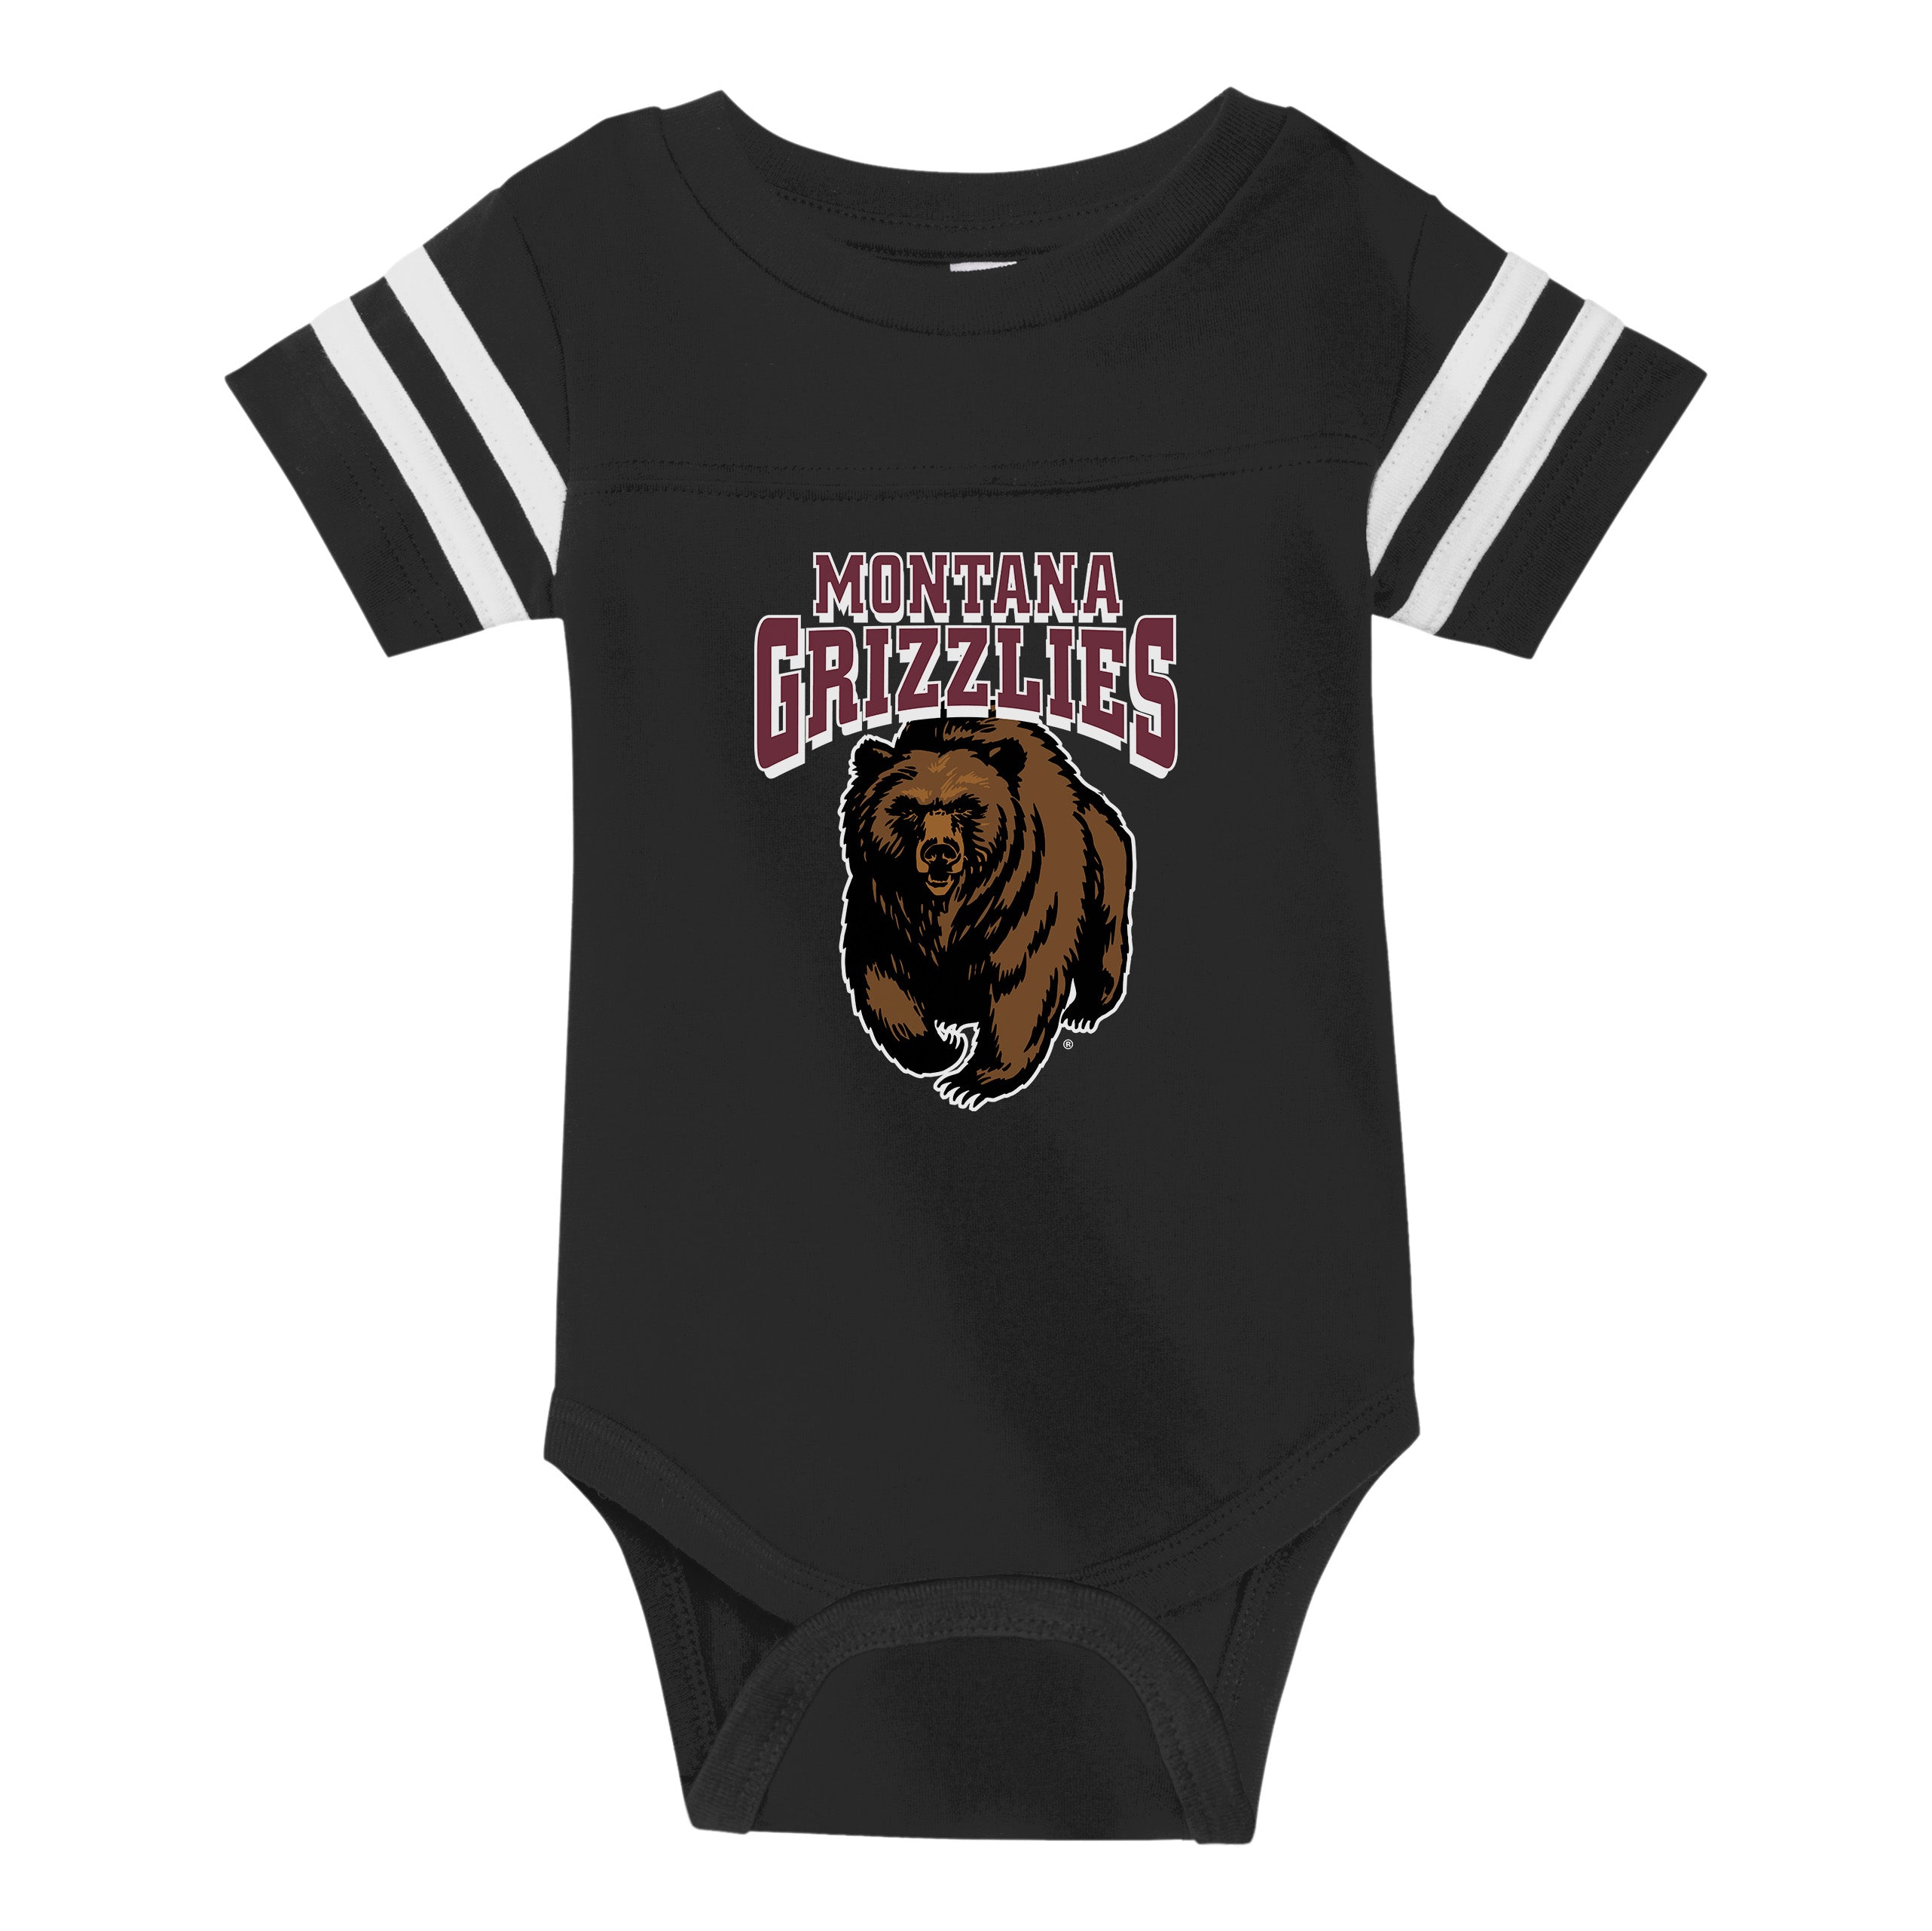 Grizzlies baby jersey